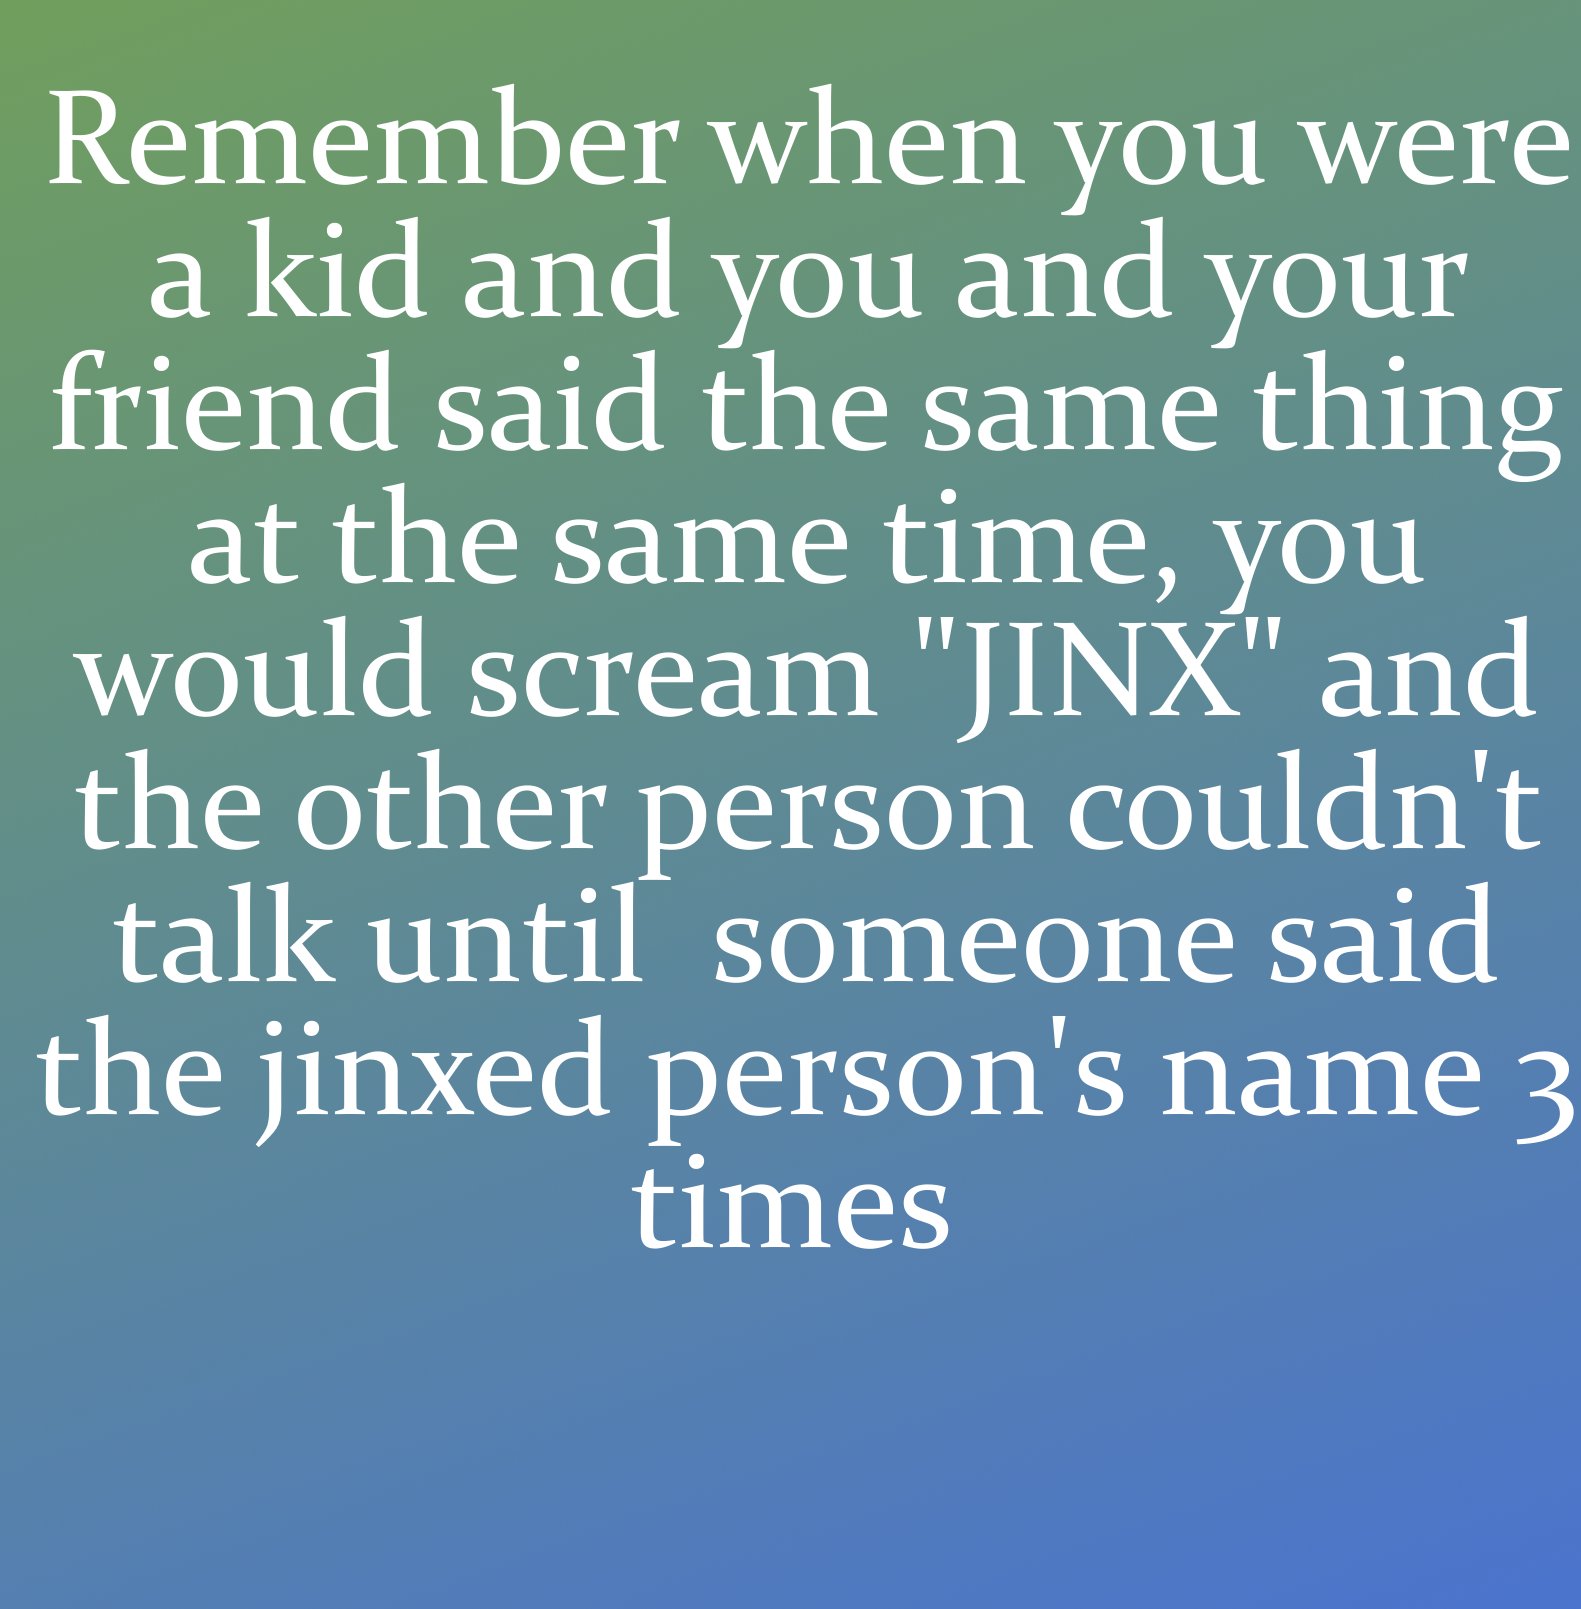 angle - Remember when you were a kid and you and your friend said the same thing at the same time, you would scream "Jinx" and the other person couldn't talk until someone said the jinxed person's name 3 times